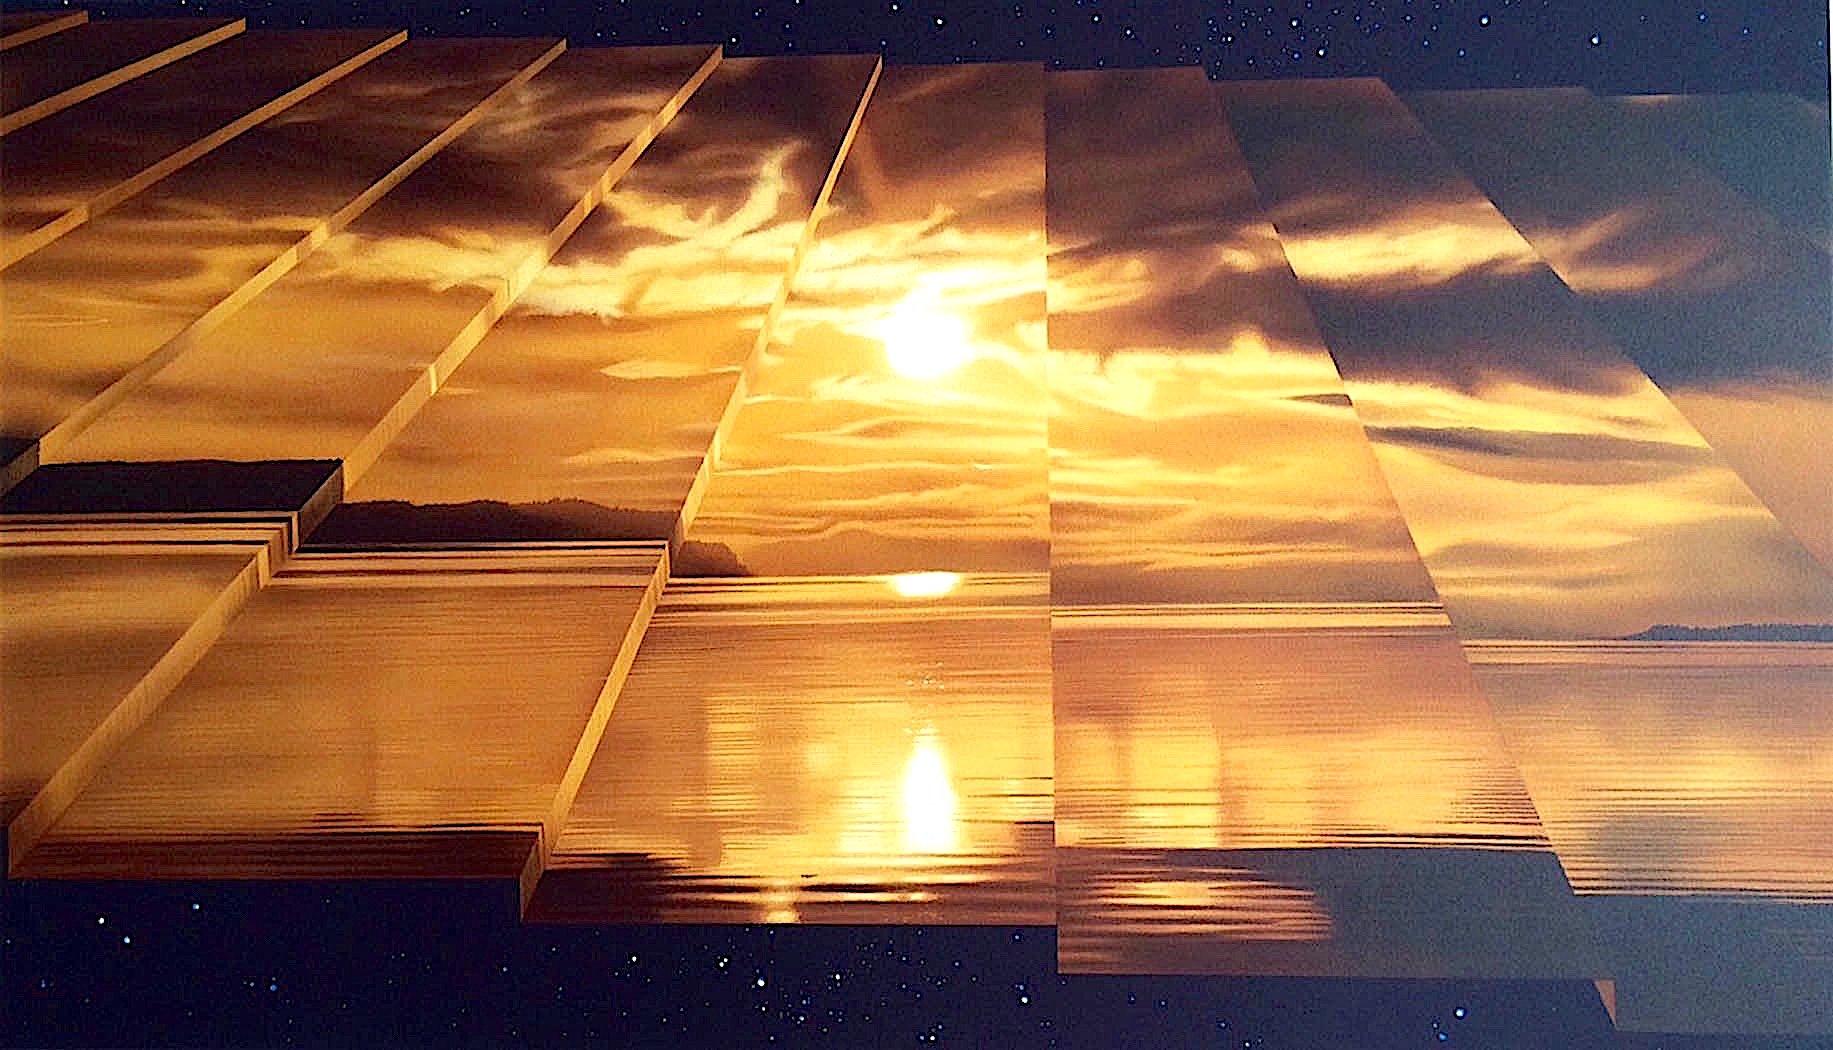 STAGGERING Signed Lithograph, Surreal Golden Sunset, Abstract Seascape